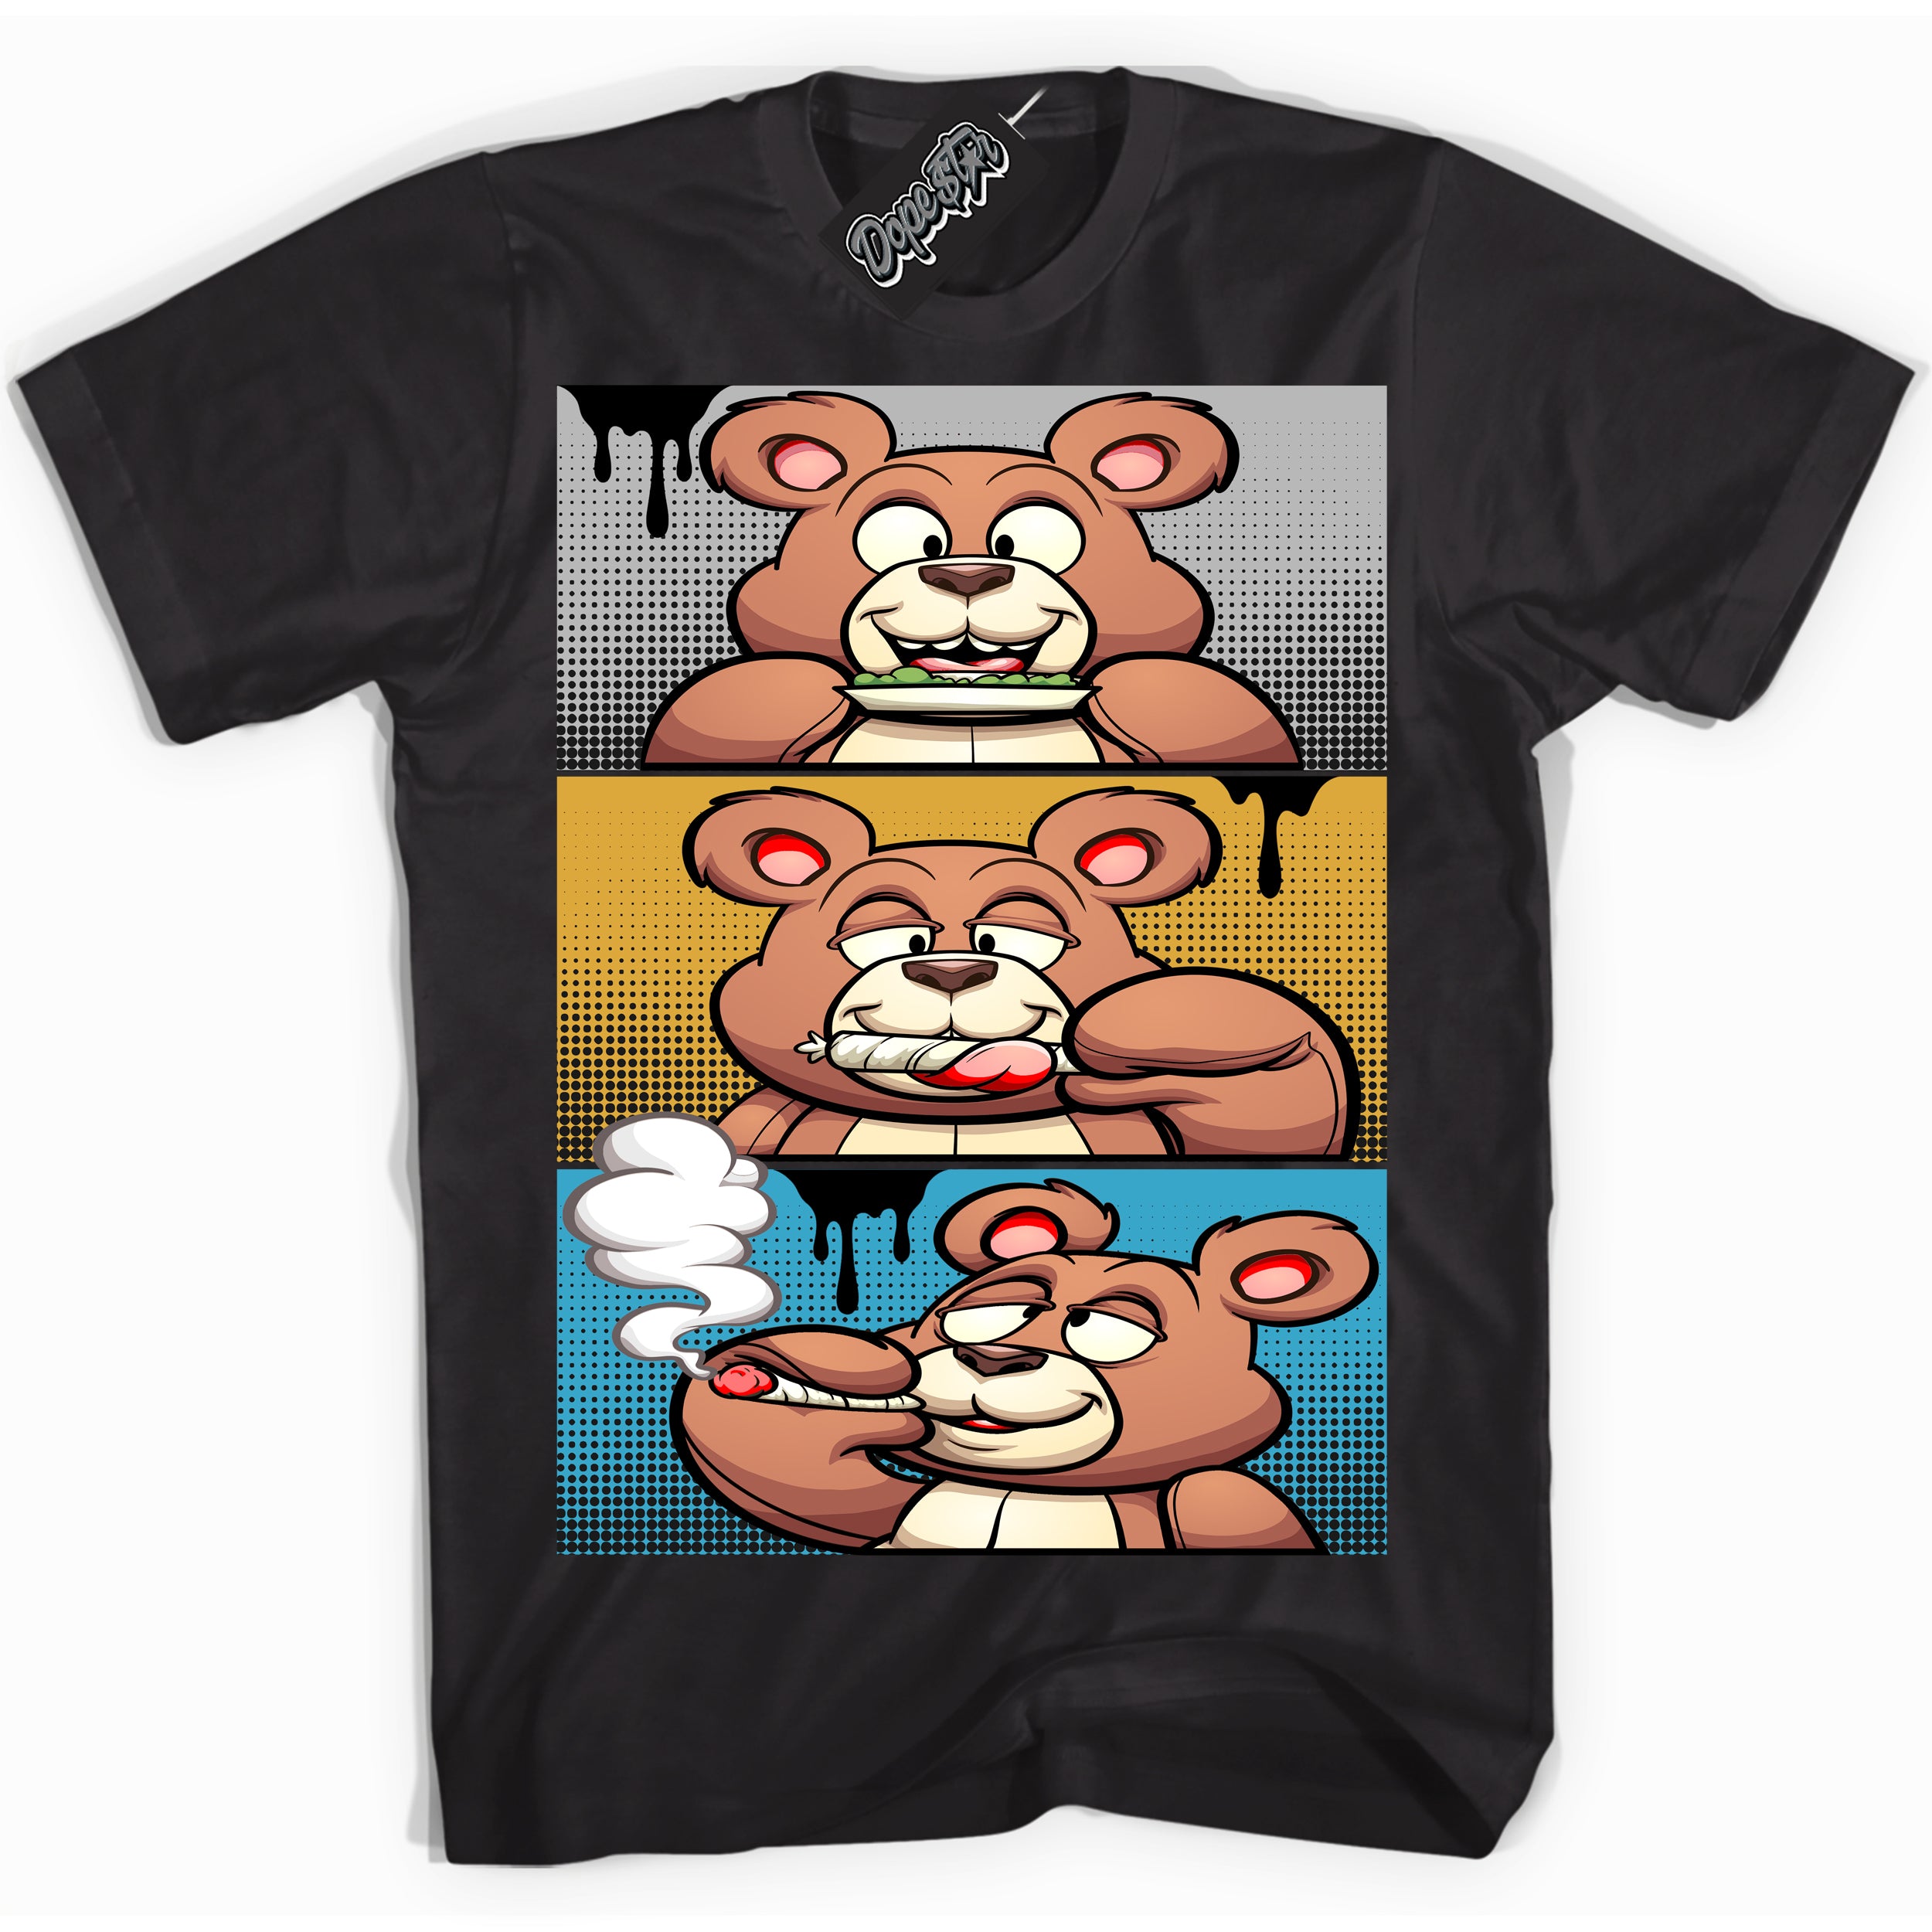 Cool Black Shirt with “ Roll It Lick It Smoke It Bear” design that perfectly matches Aqua 5s Sneakers.